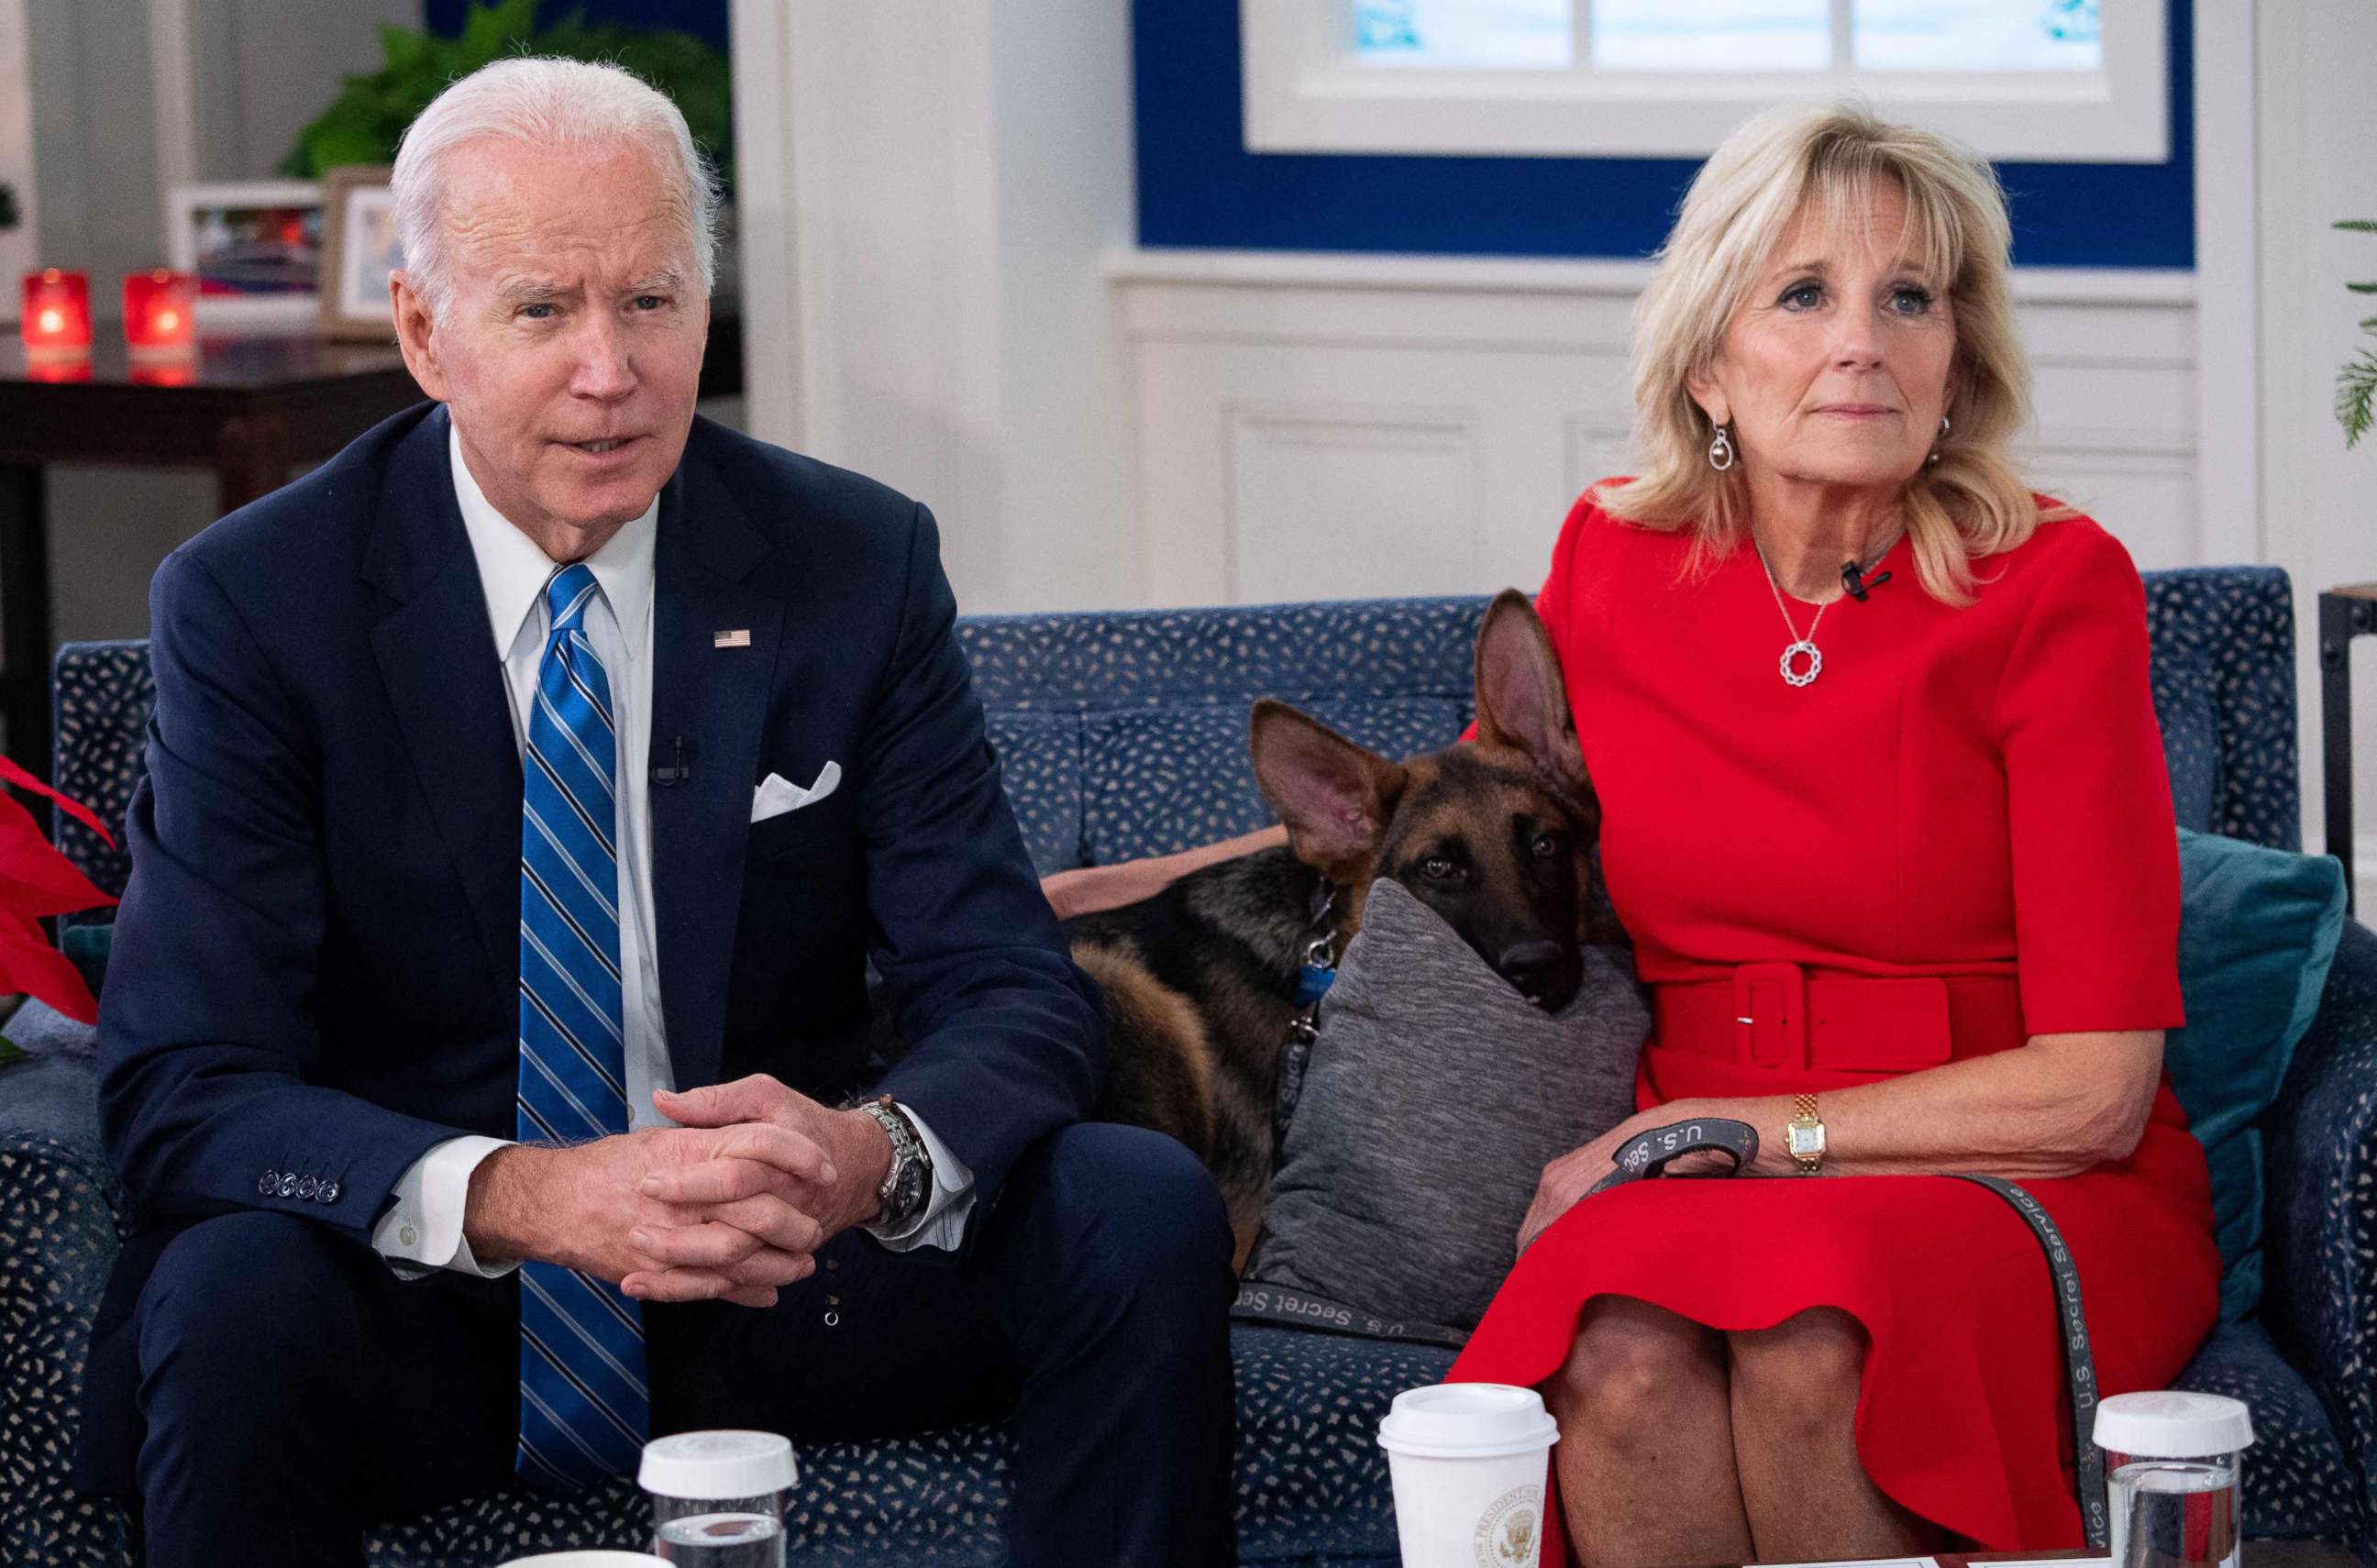 PHOTO: President Joe Biden and First Lady Jill Biden, with their new dog Commander, speak virtually with military service members to thank them for their service and wish then a Merry Christmas, Dec. 25, 2021.